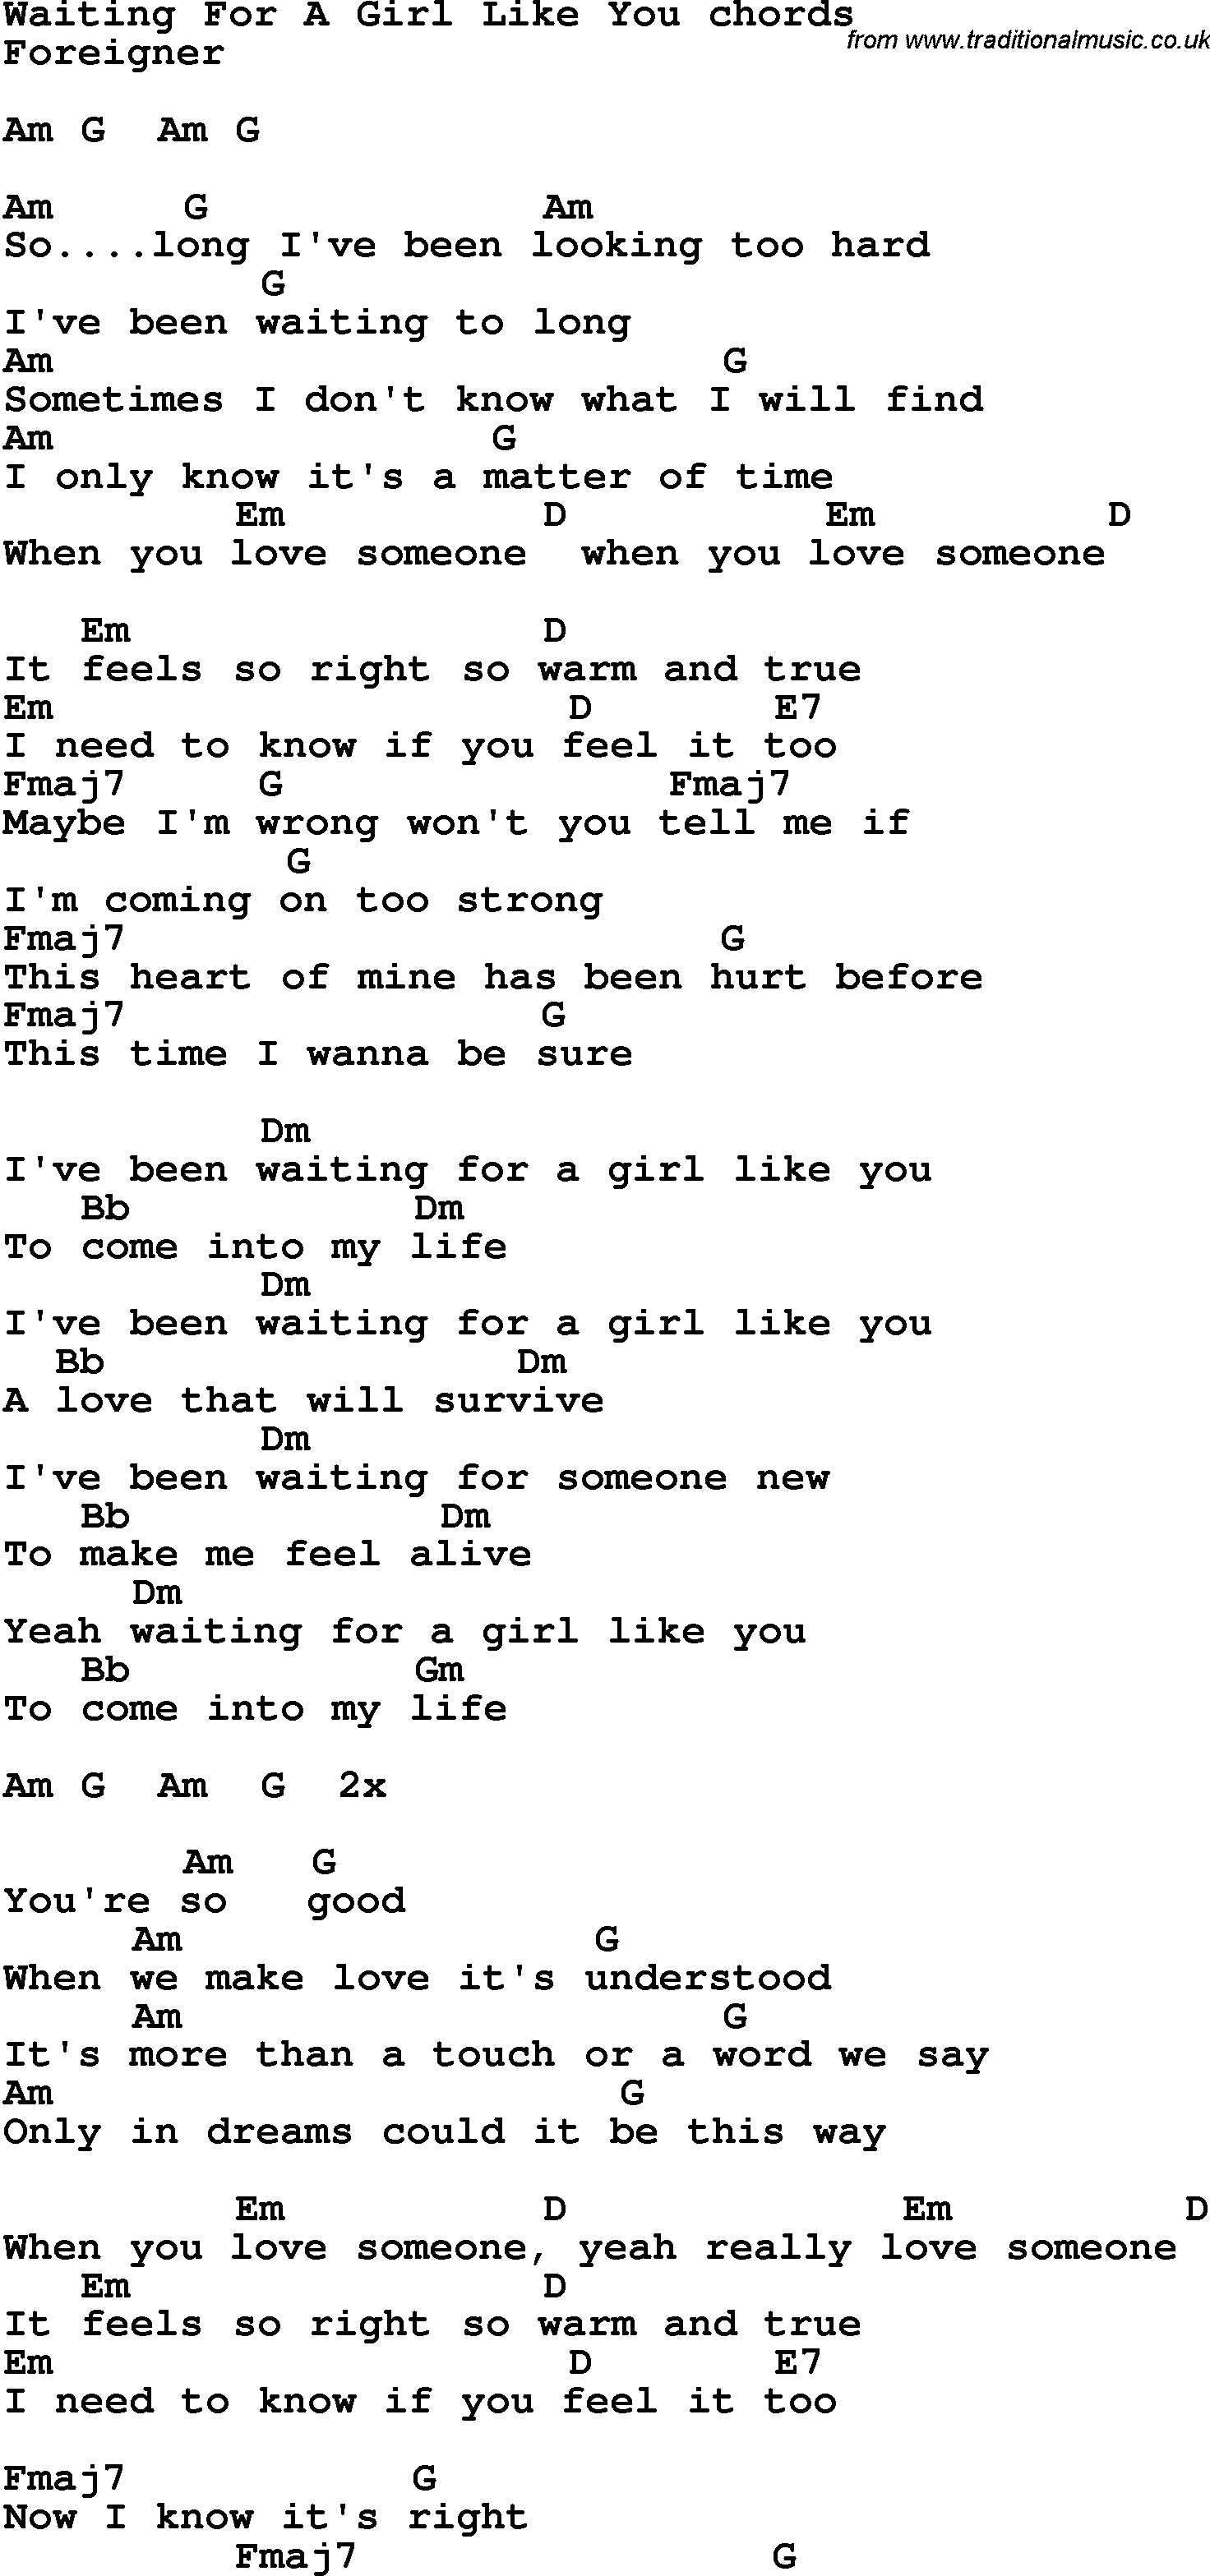 Song Lyrics With Guitar Chords For Waiting For A Girl Like You